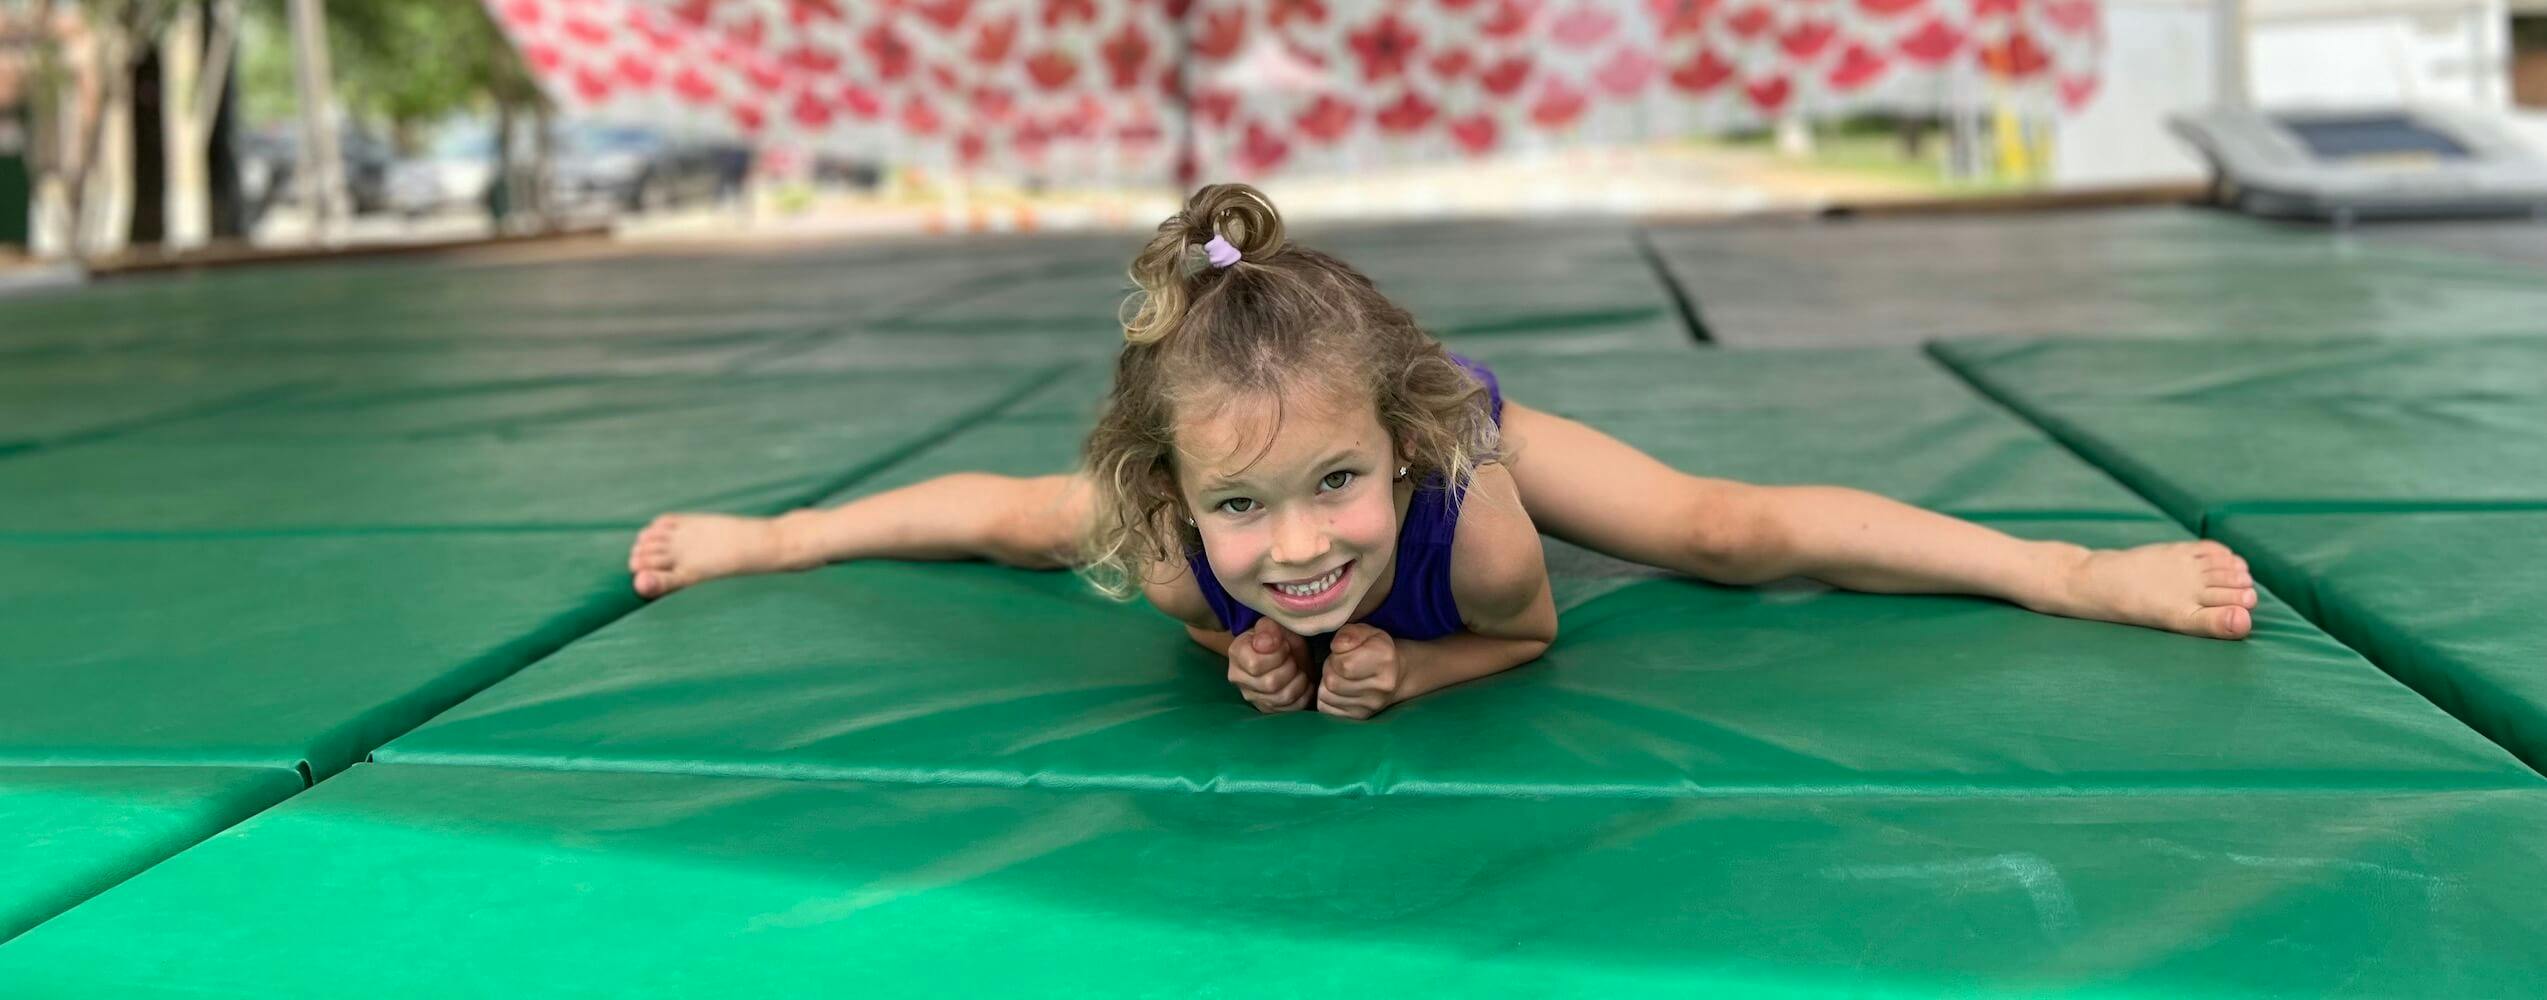 A child smiling on a green mat